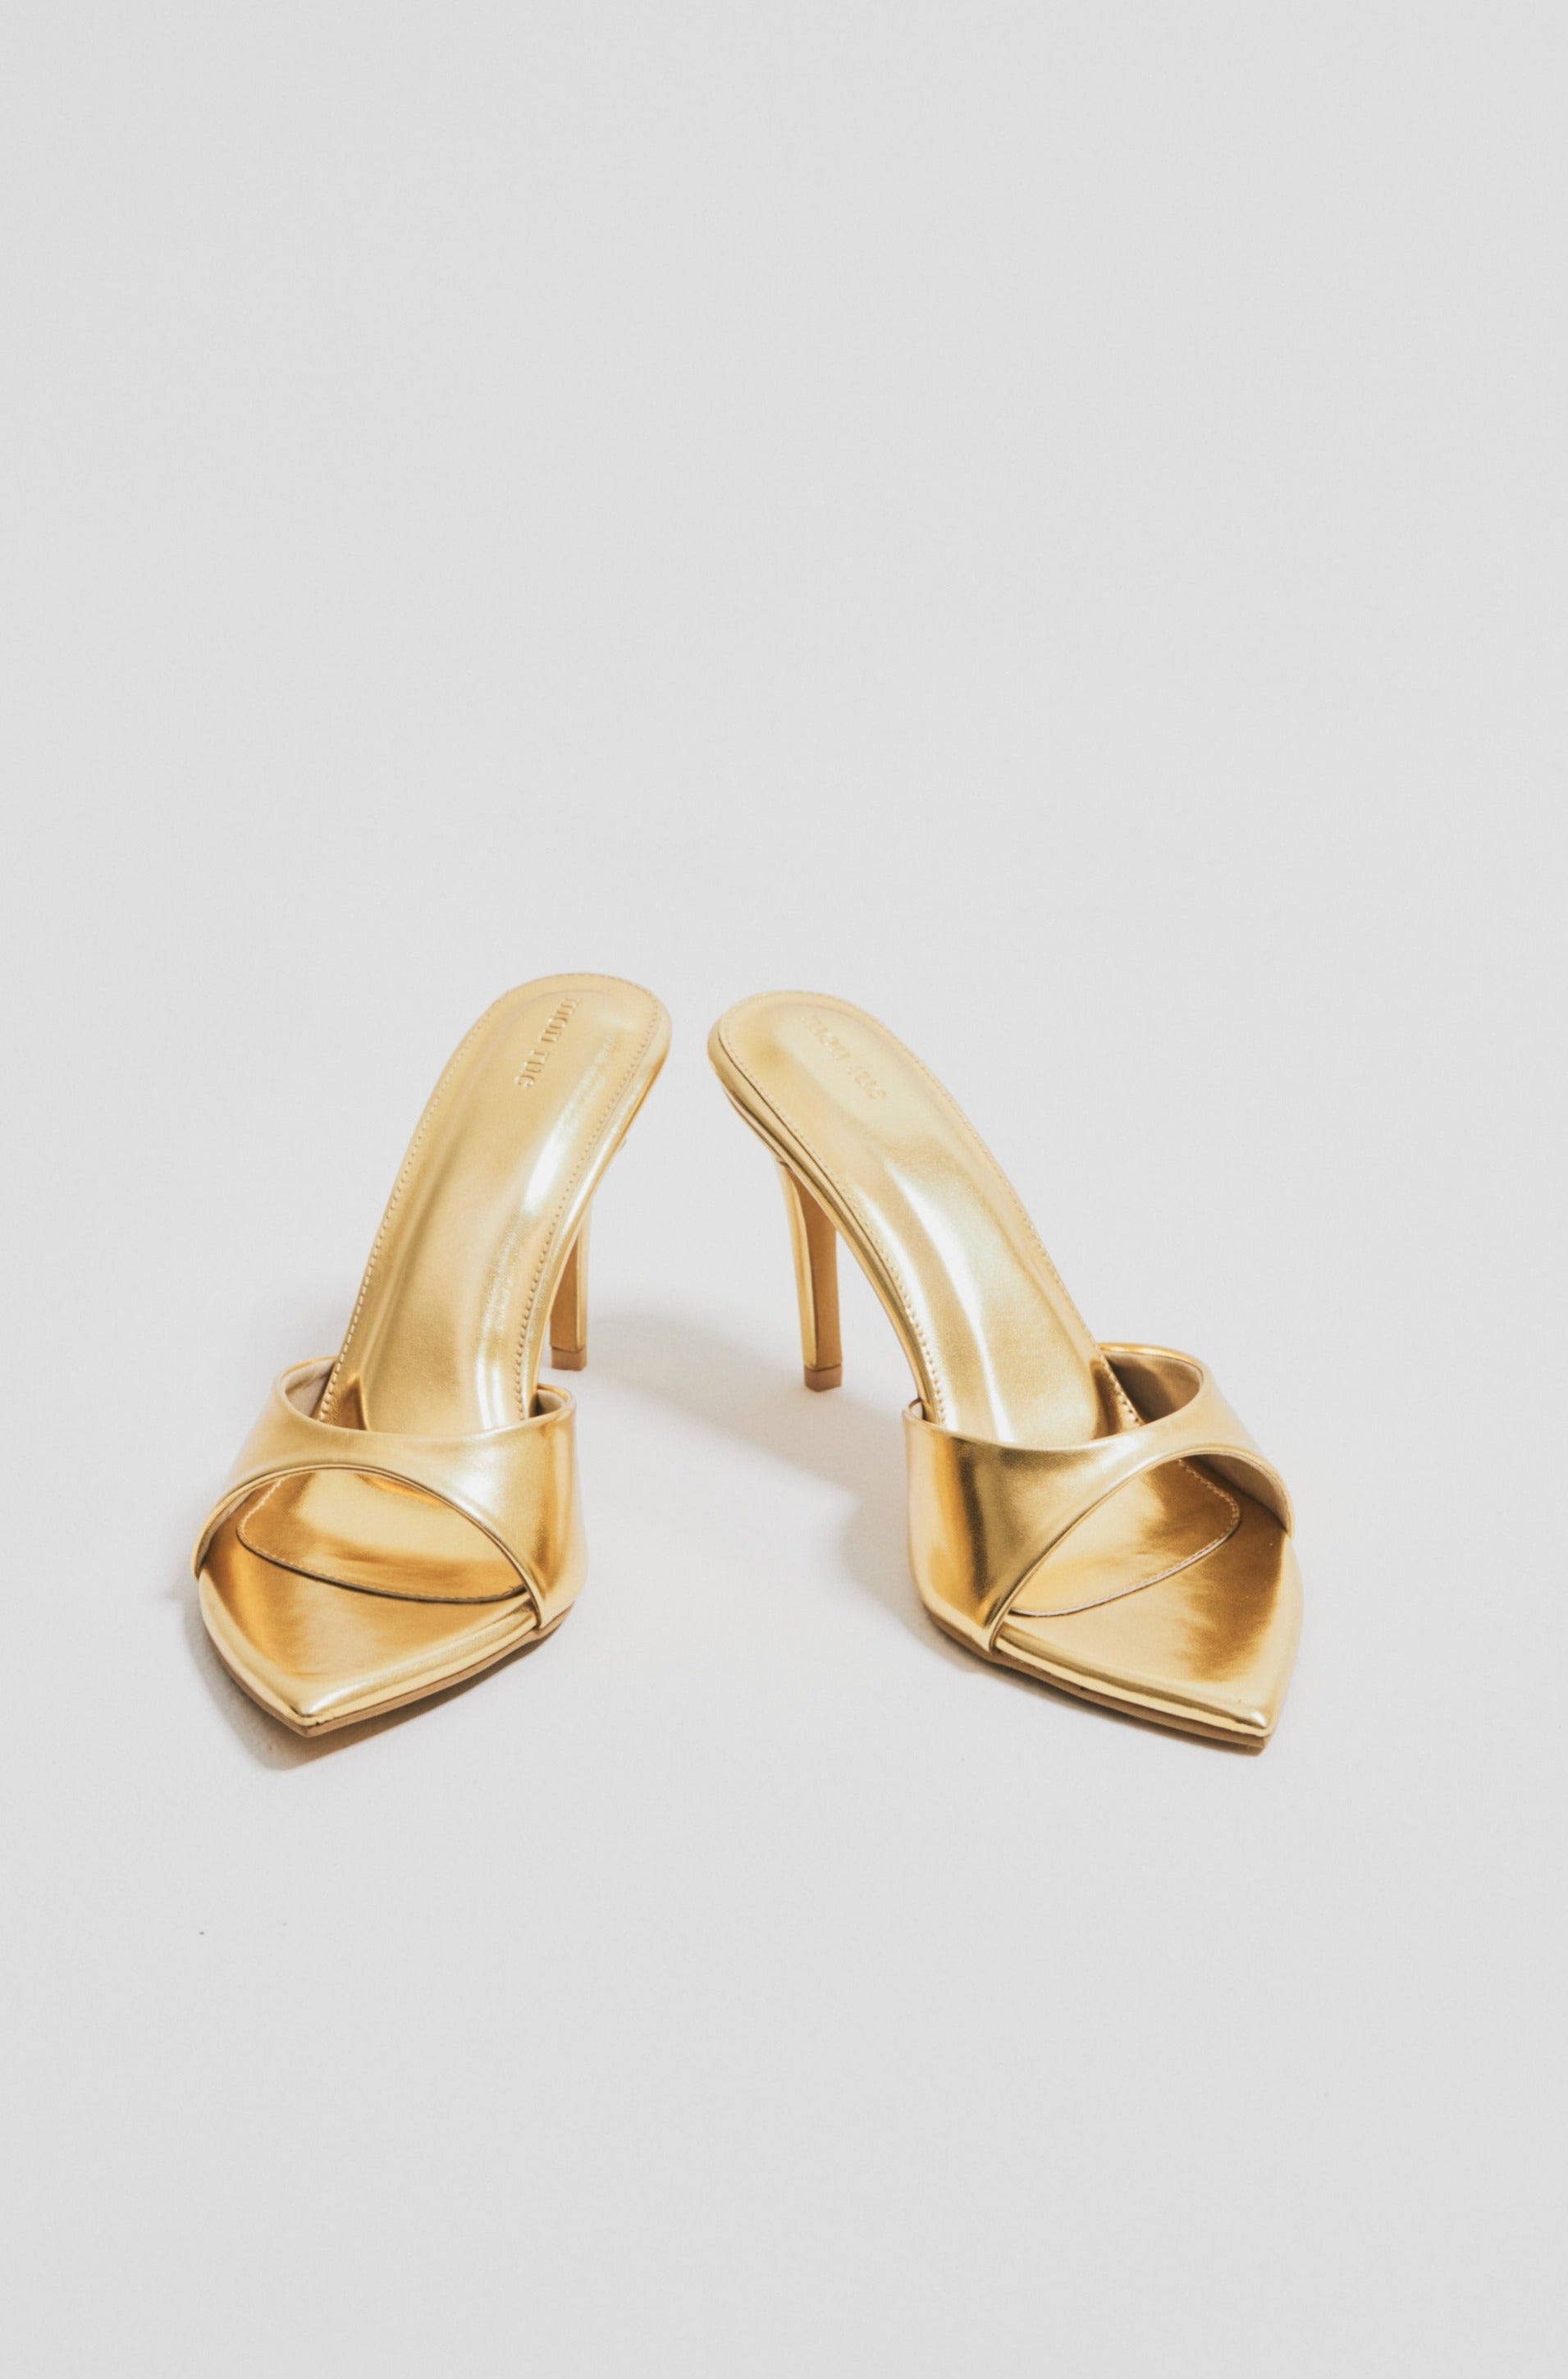 On-Point 2.0 Heels in Gold